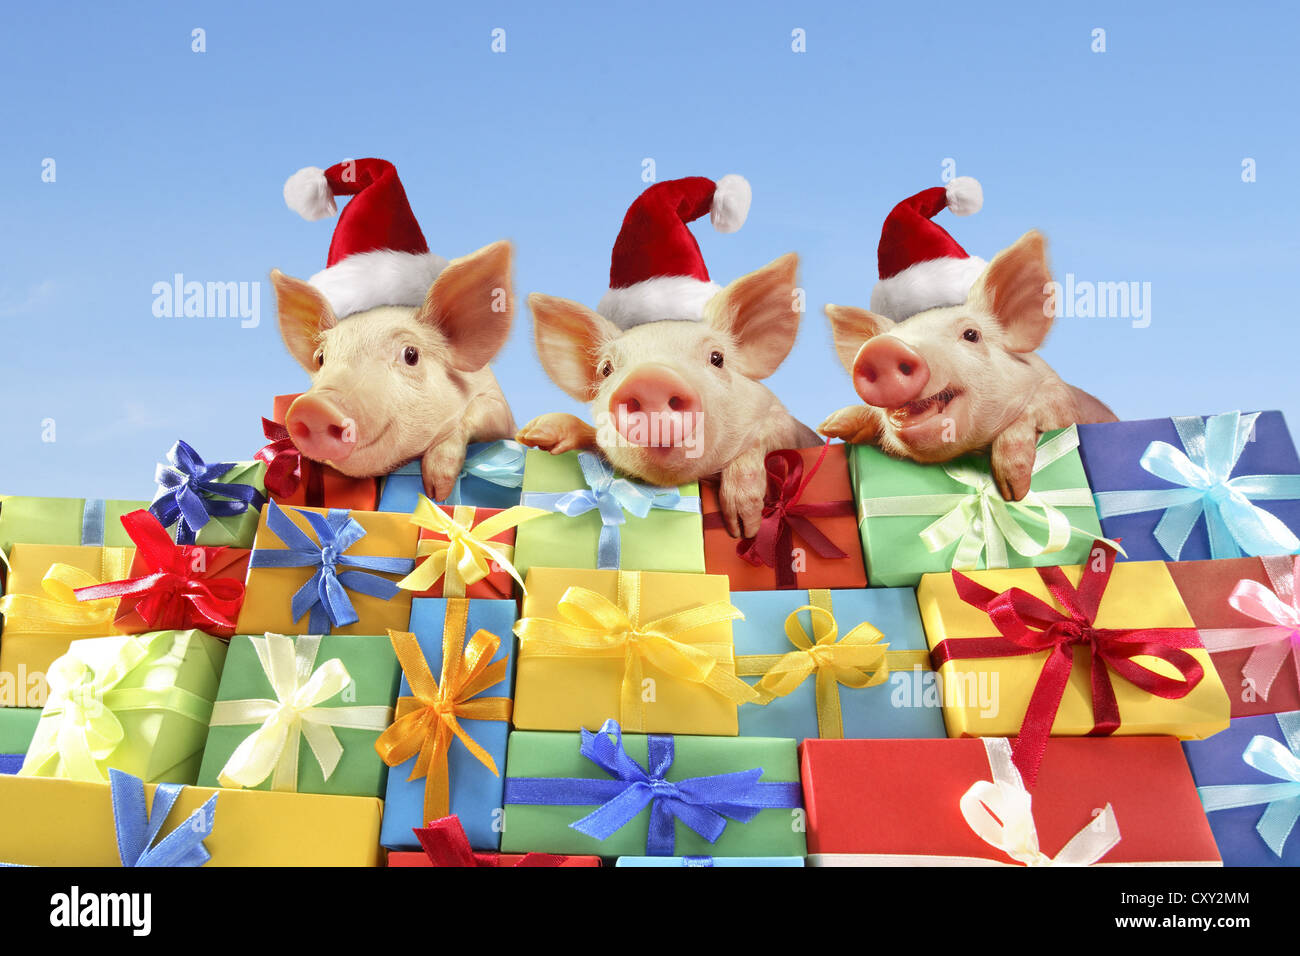 Piglets wearing Santa hats sitting on a pile of gifts Stock Photo - Alamy